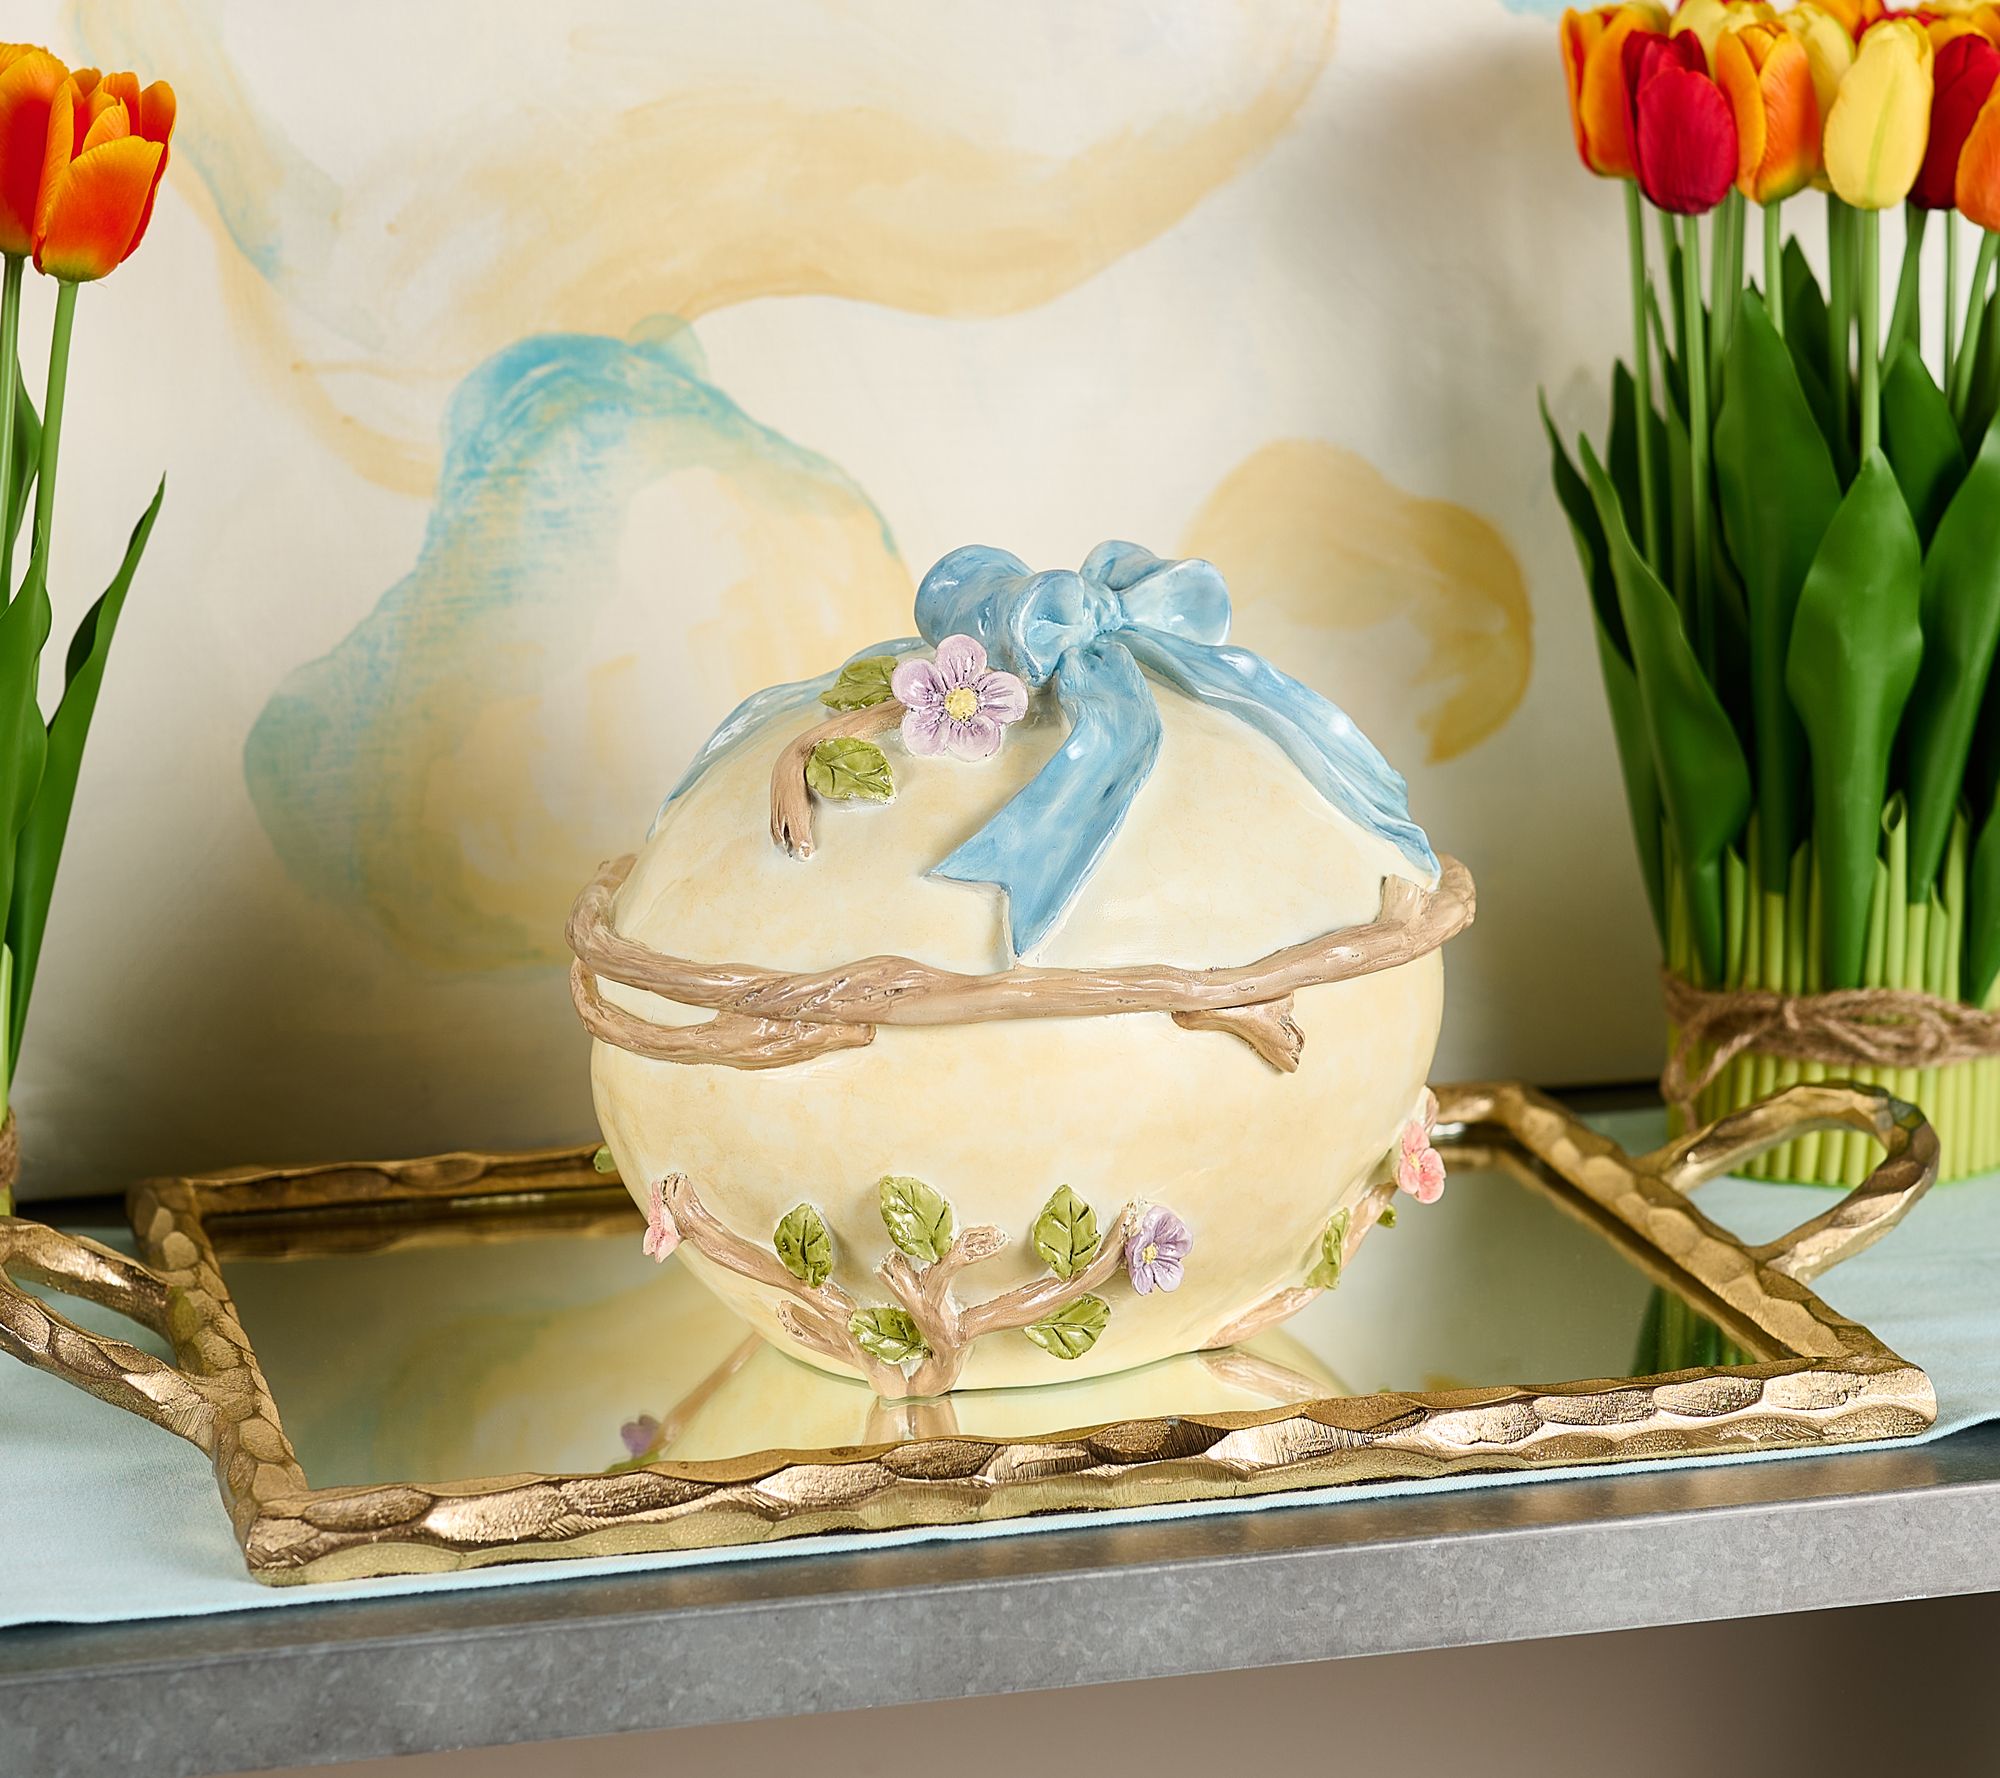 Shop for London Pottery, Easter Gifting, Home & Garden